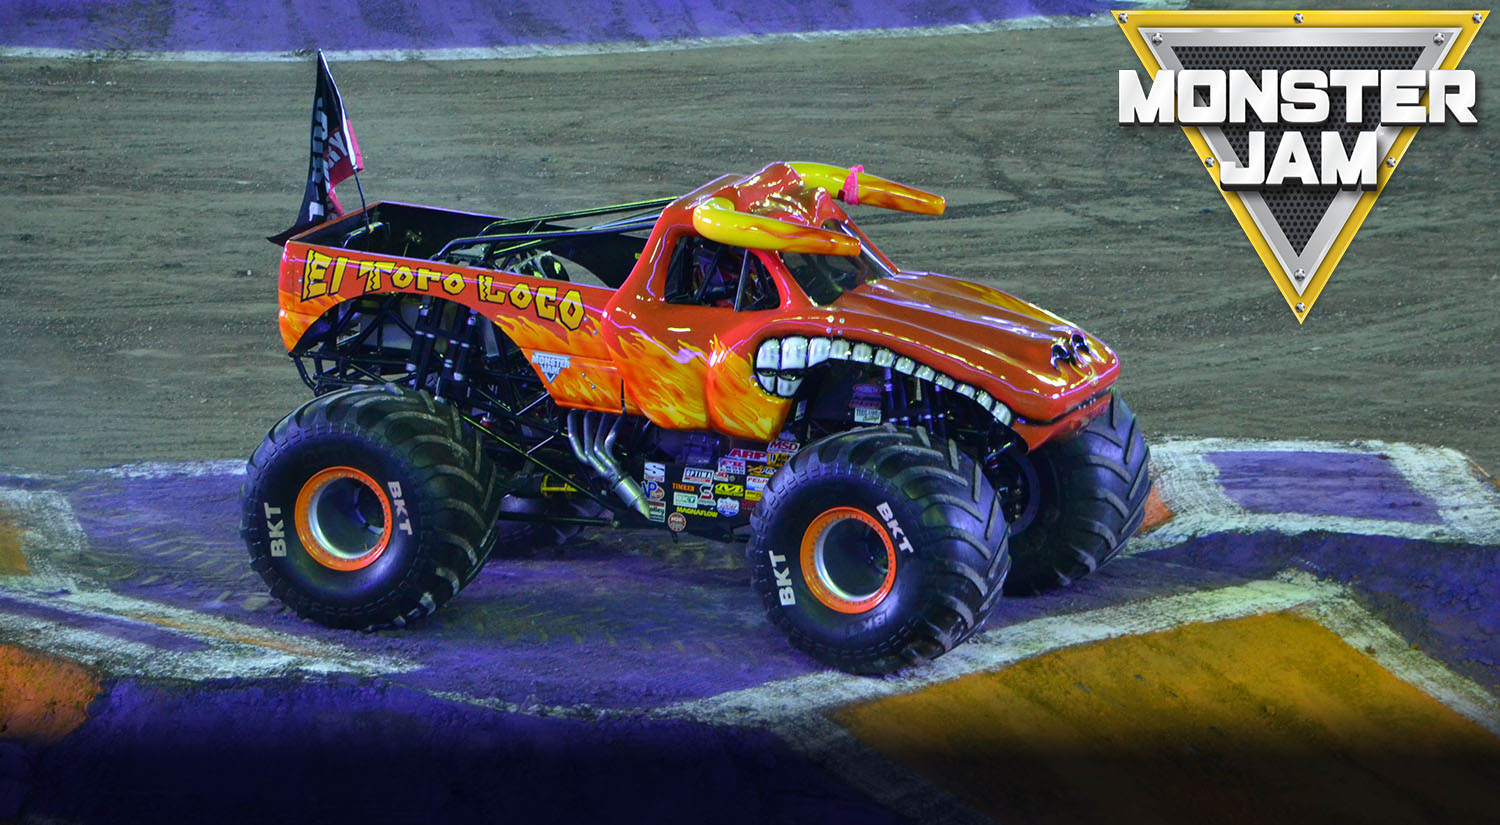 Monster Jam is coming to Orlando this weekend!